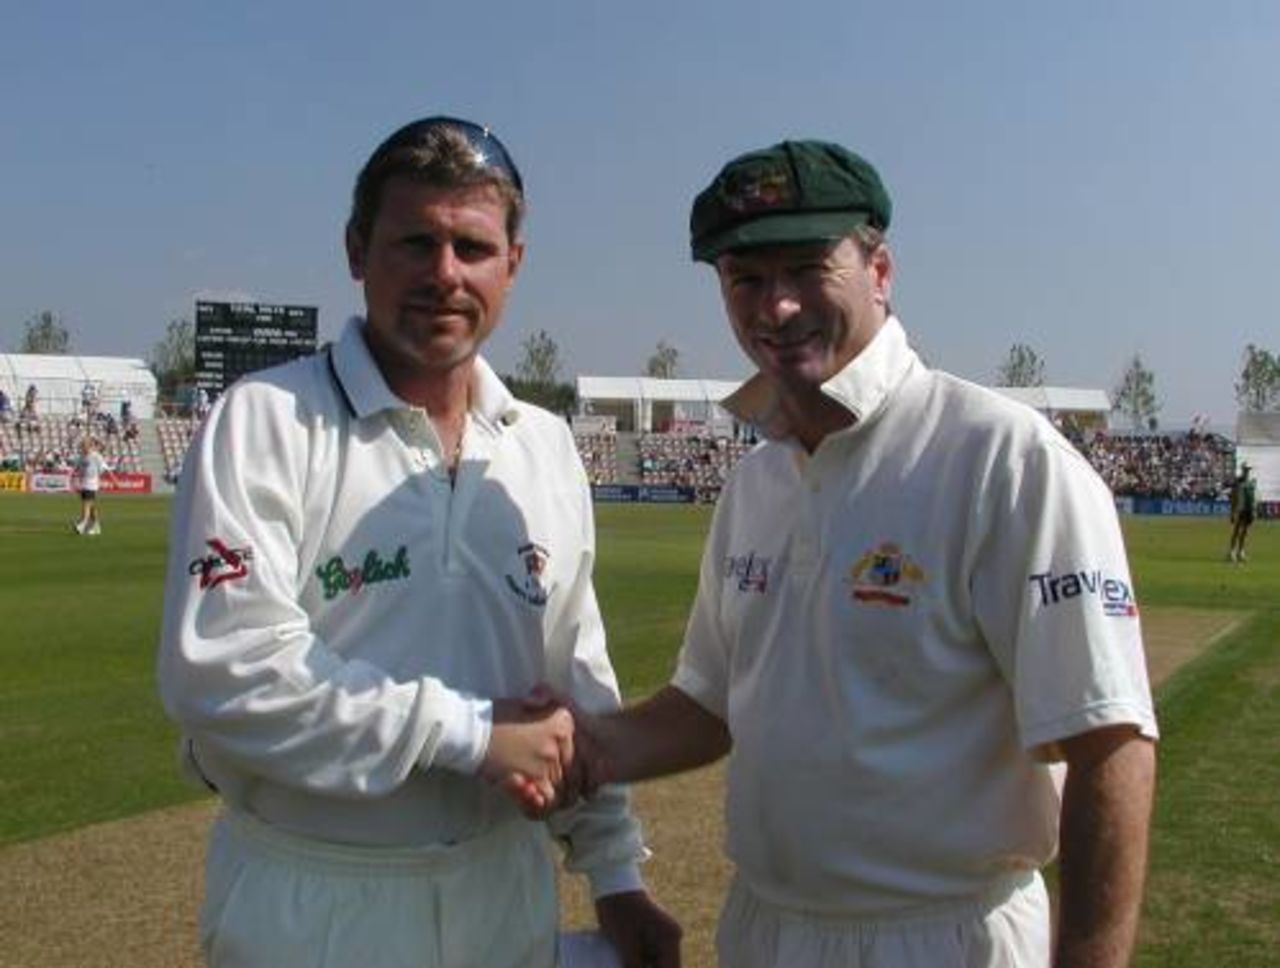 Robin Smith wins the toss at the start of a memorable game.